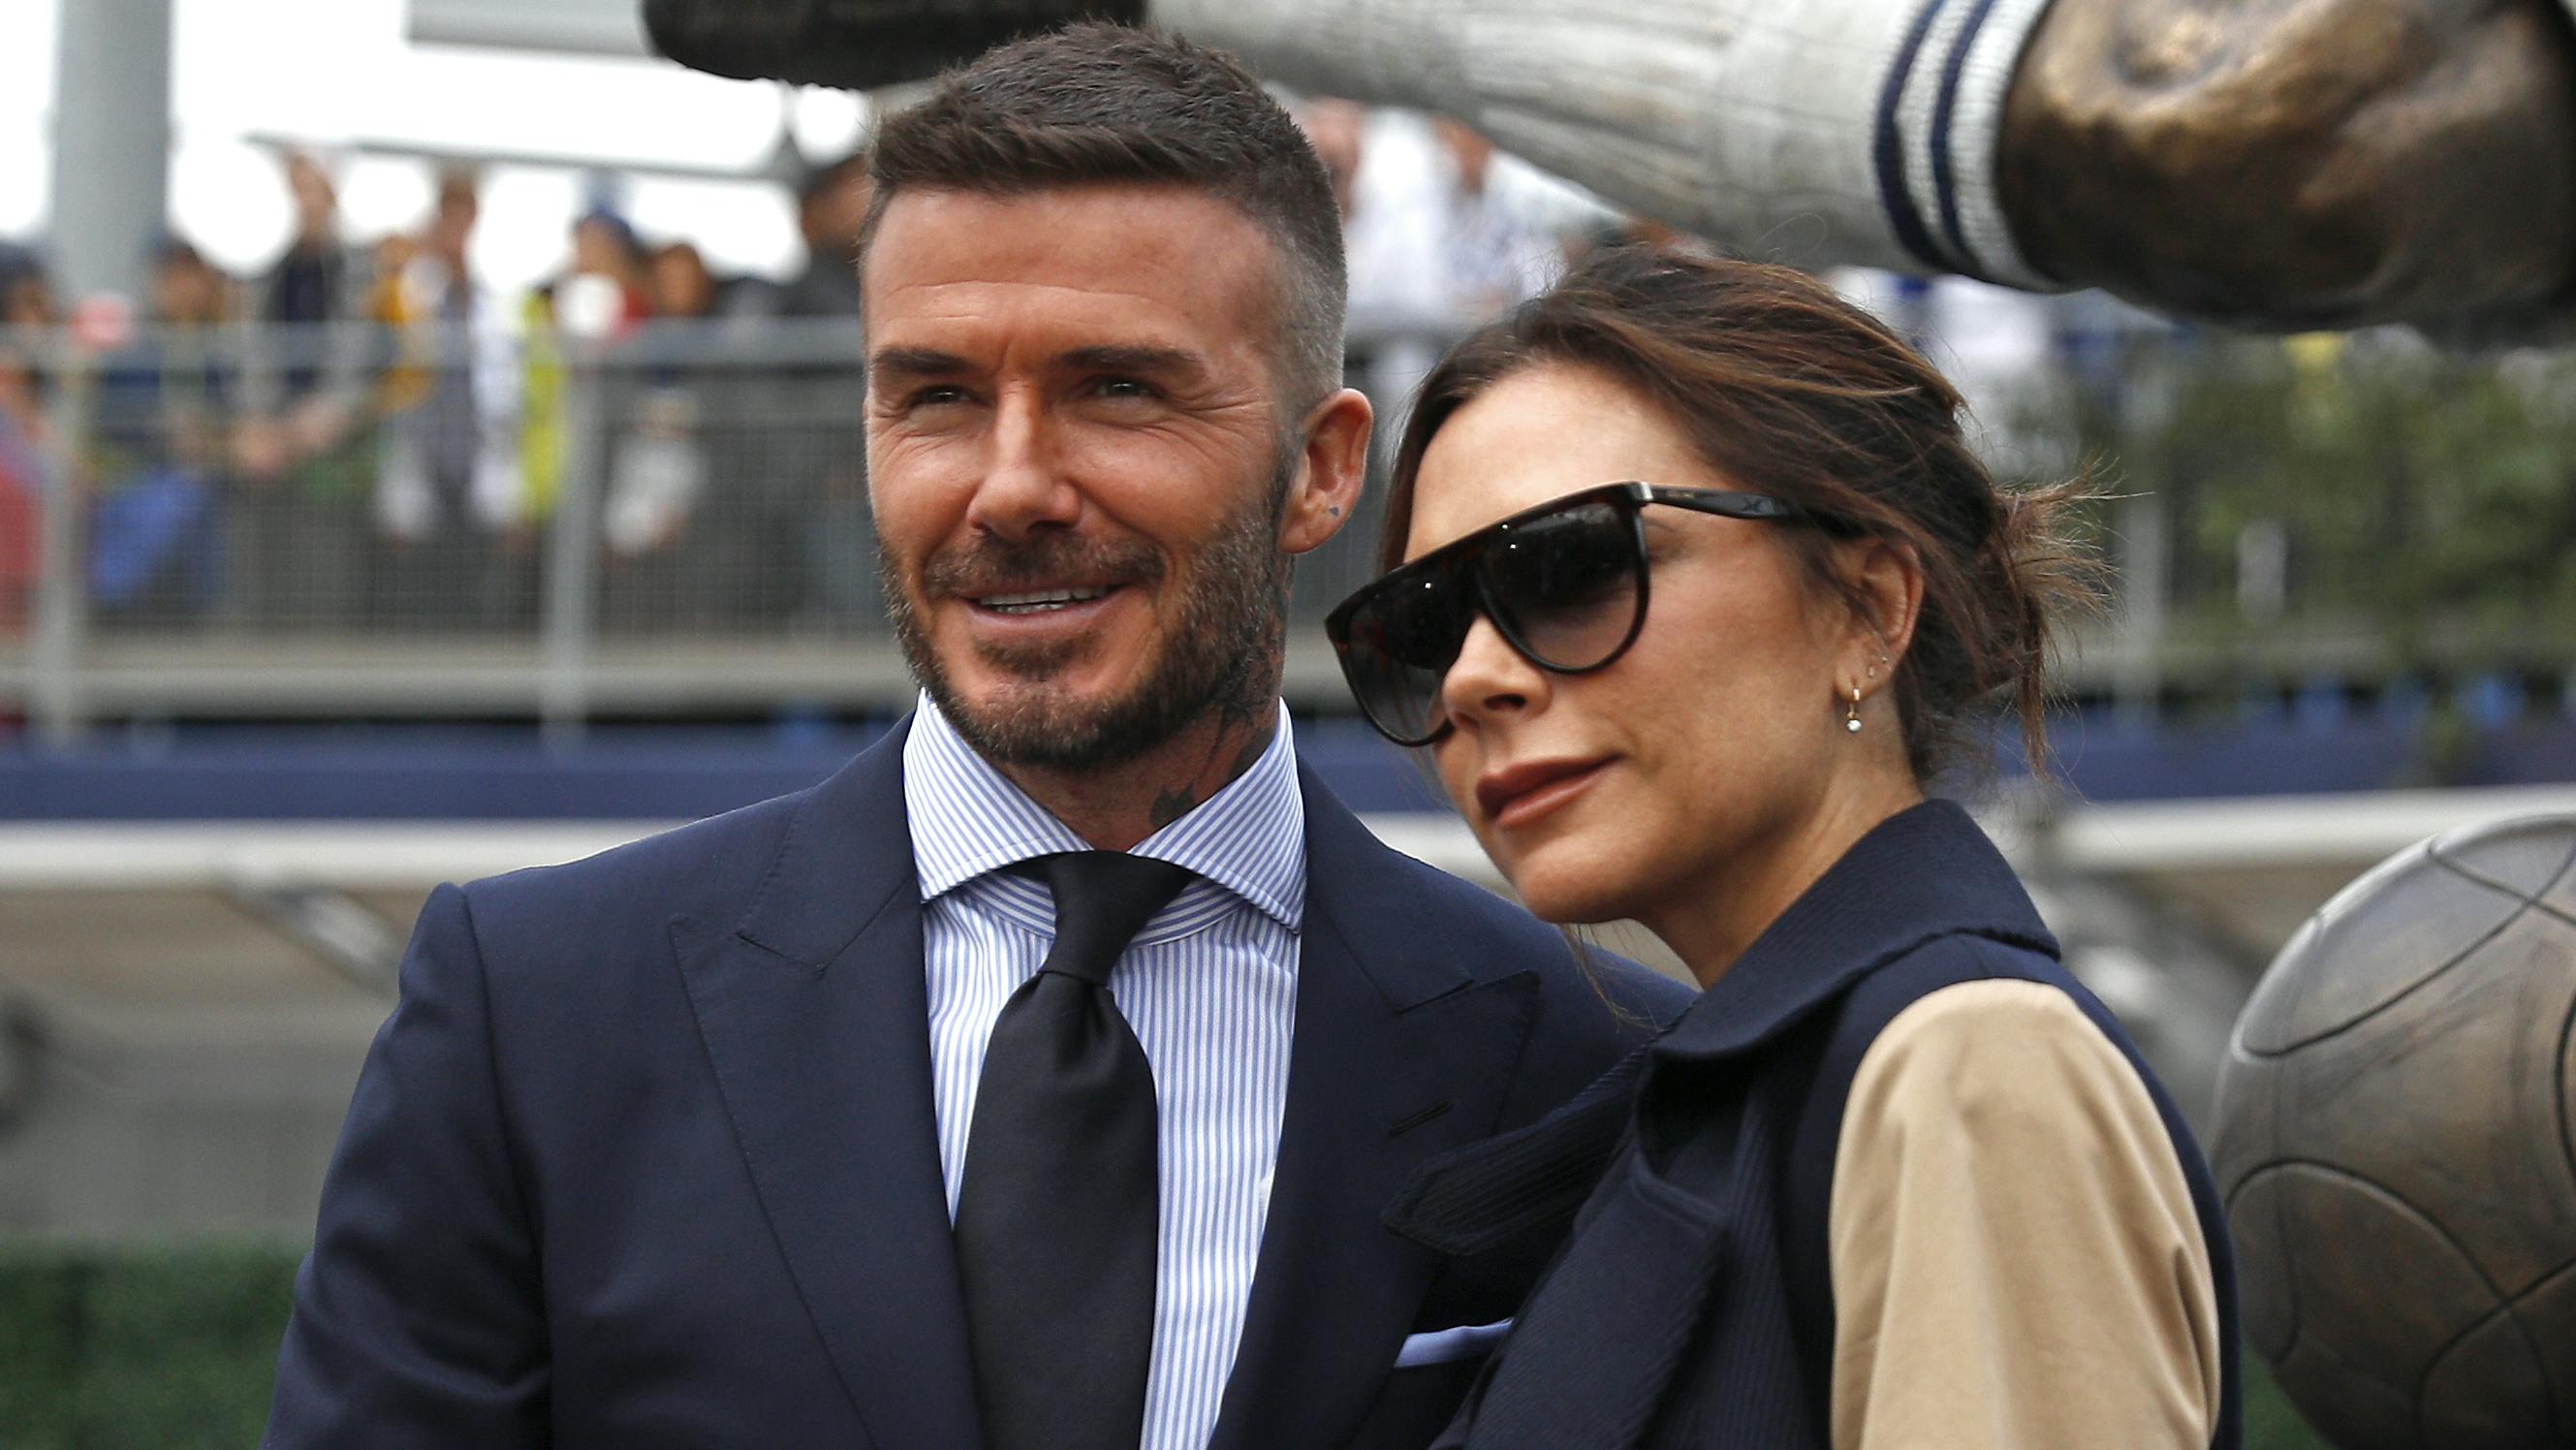 Victoria Beckham sexes up her image to warn rival WAGS off David! Celebrity Closer